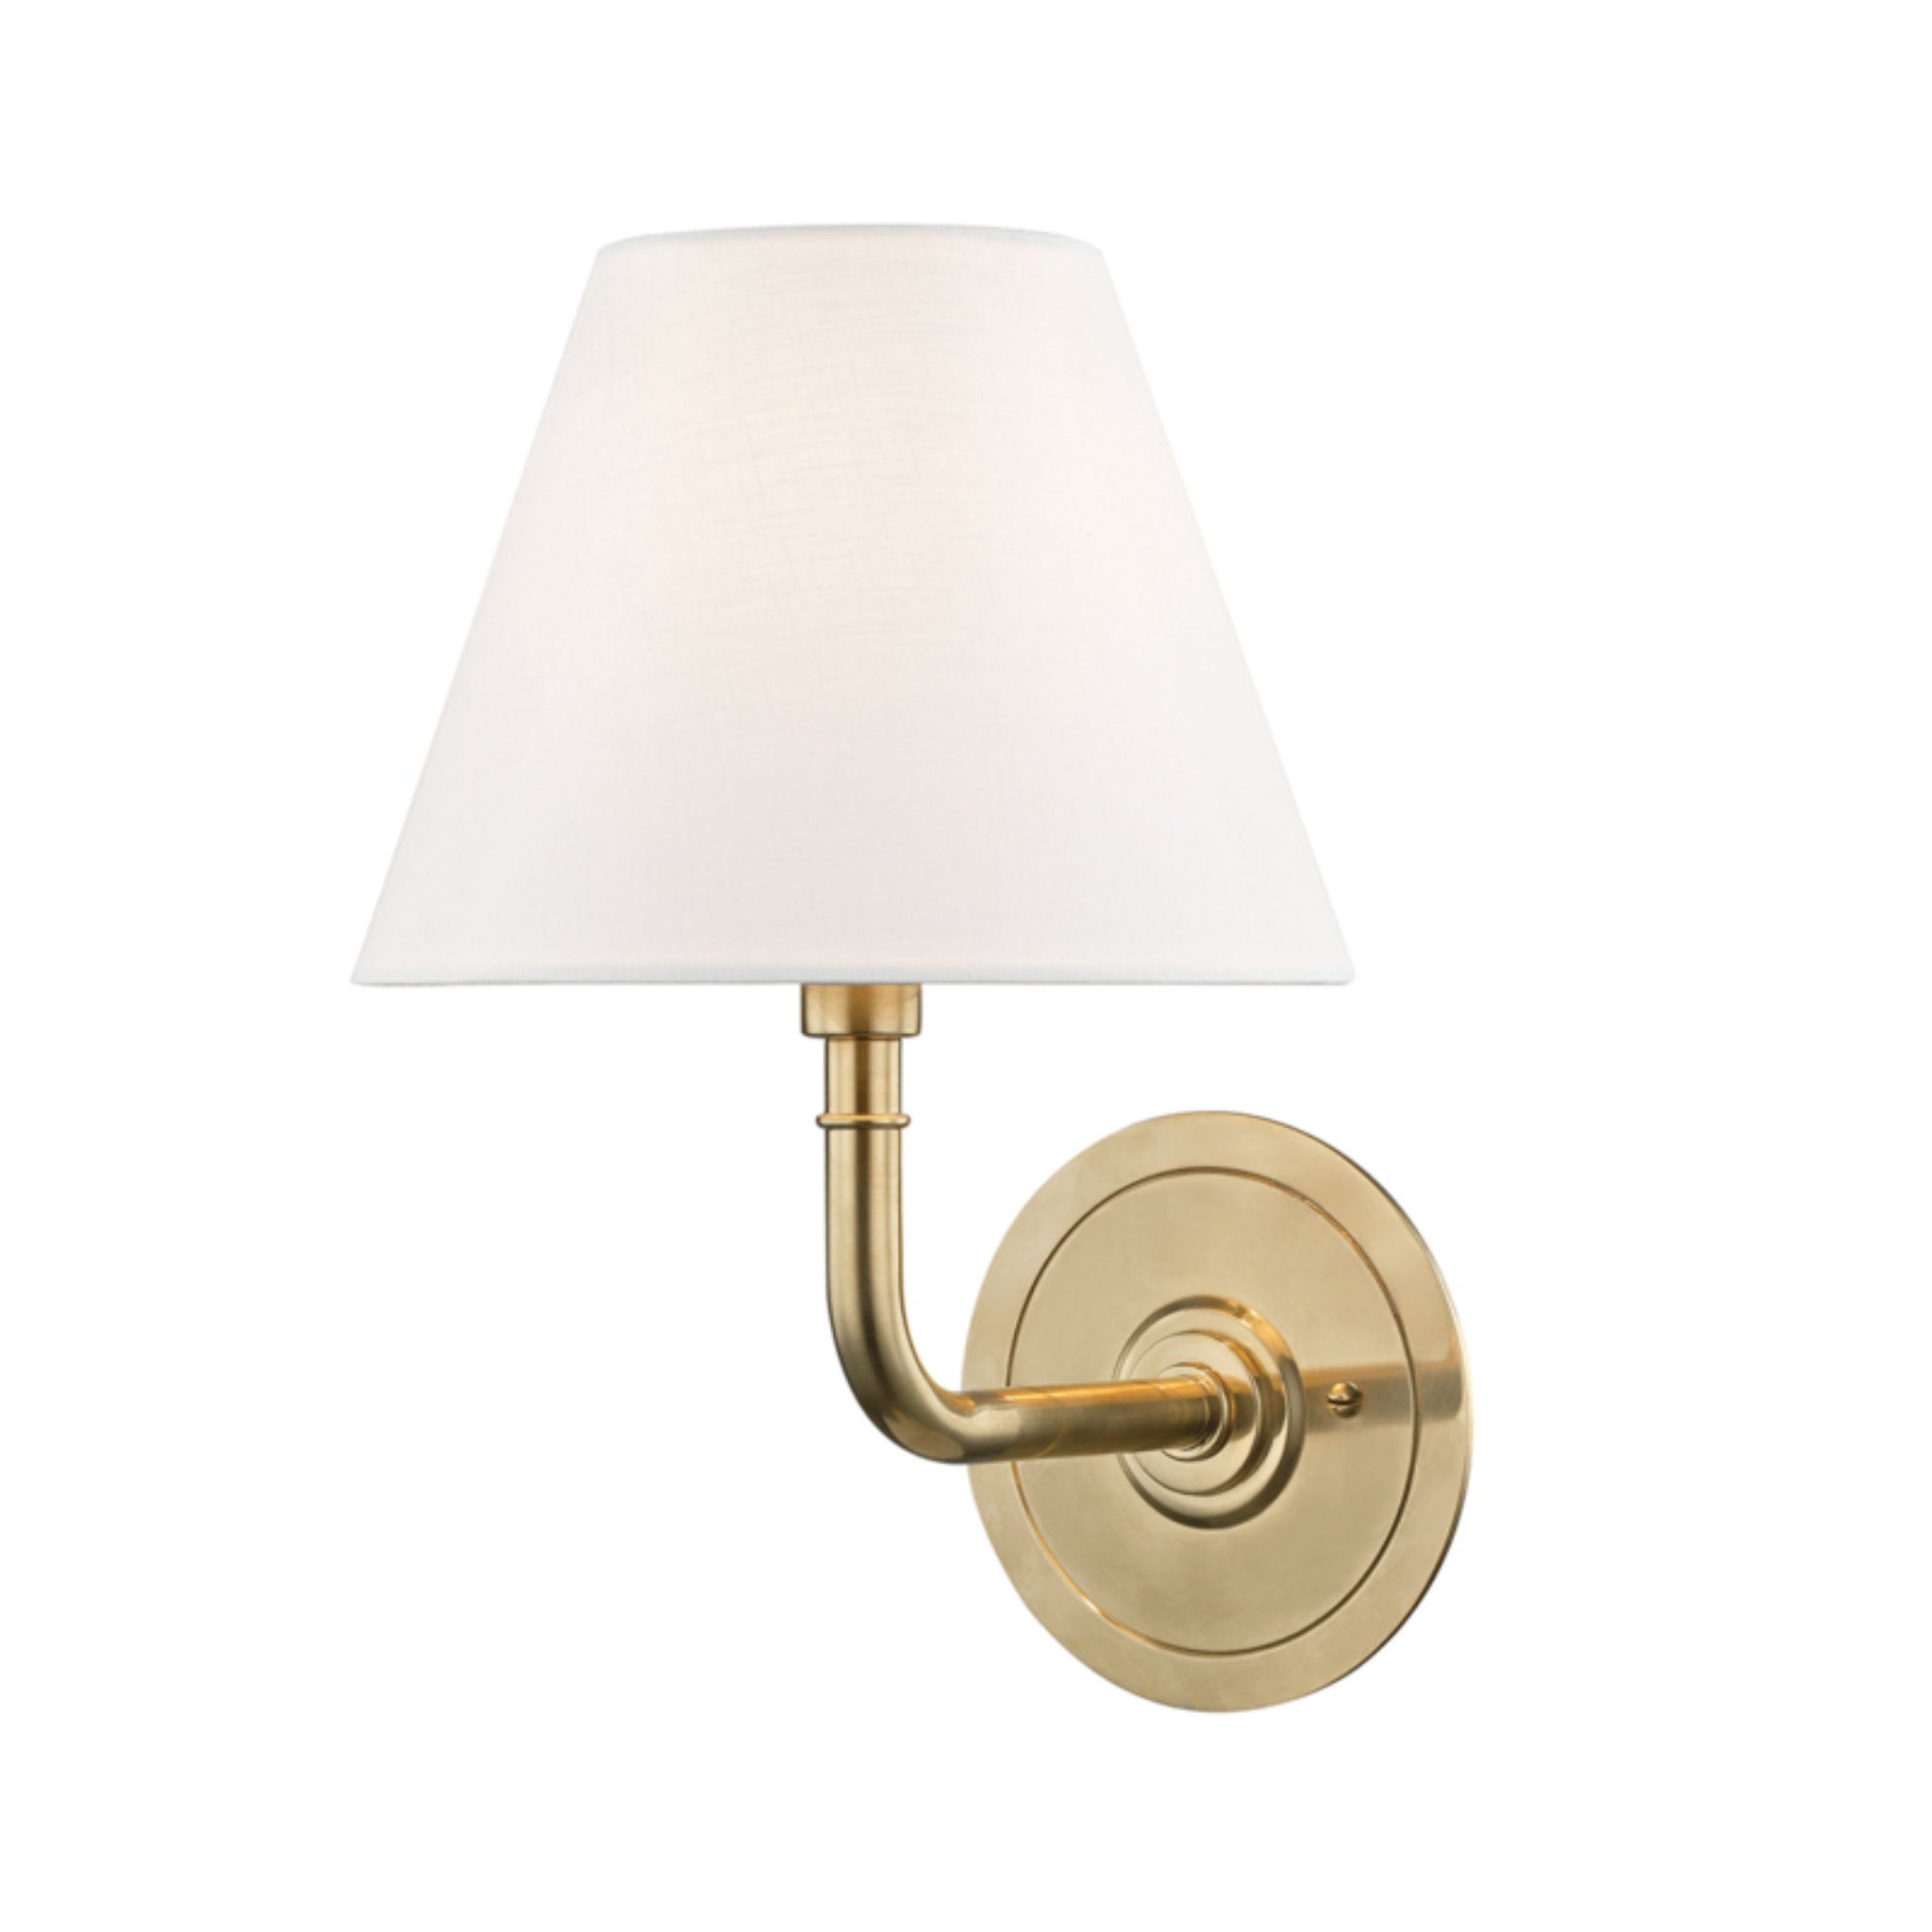 Signature No.1 1 Light Wall Sconce in Aged Brass by Mark D. Sikes